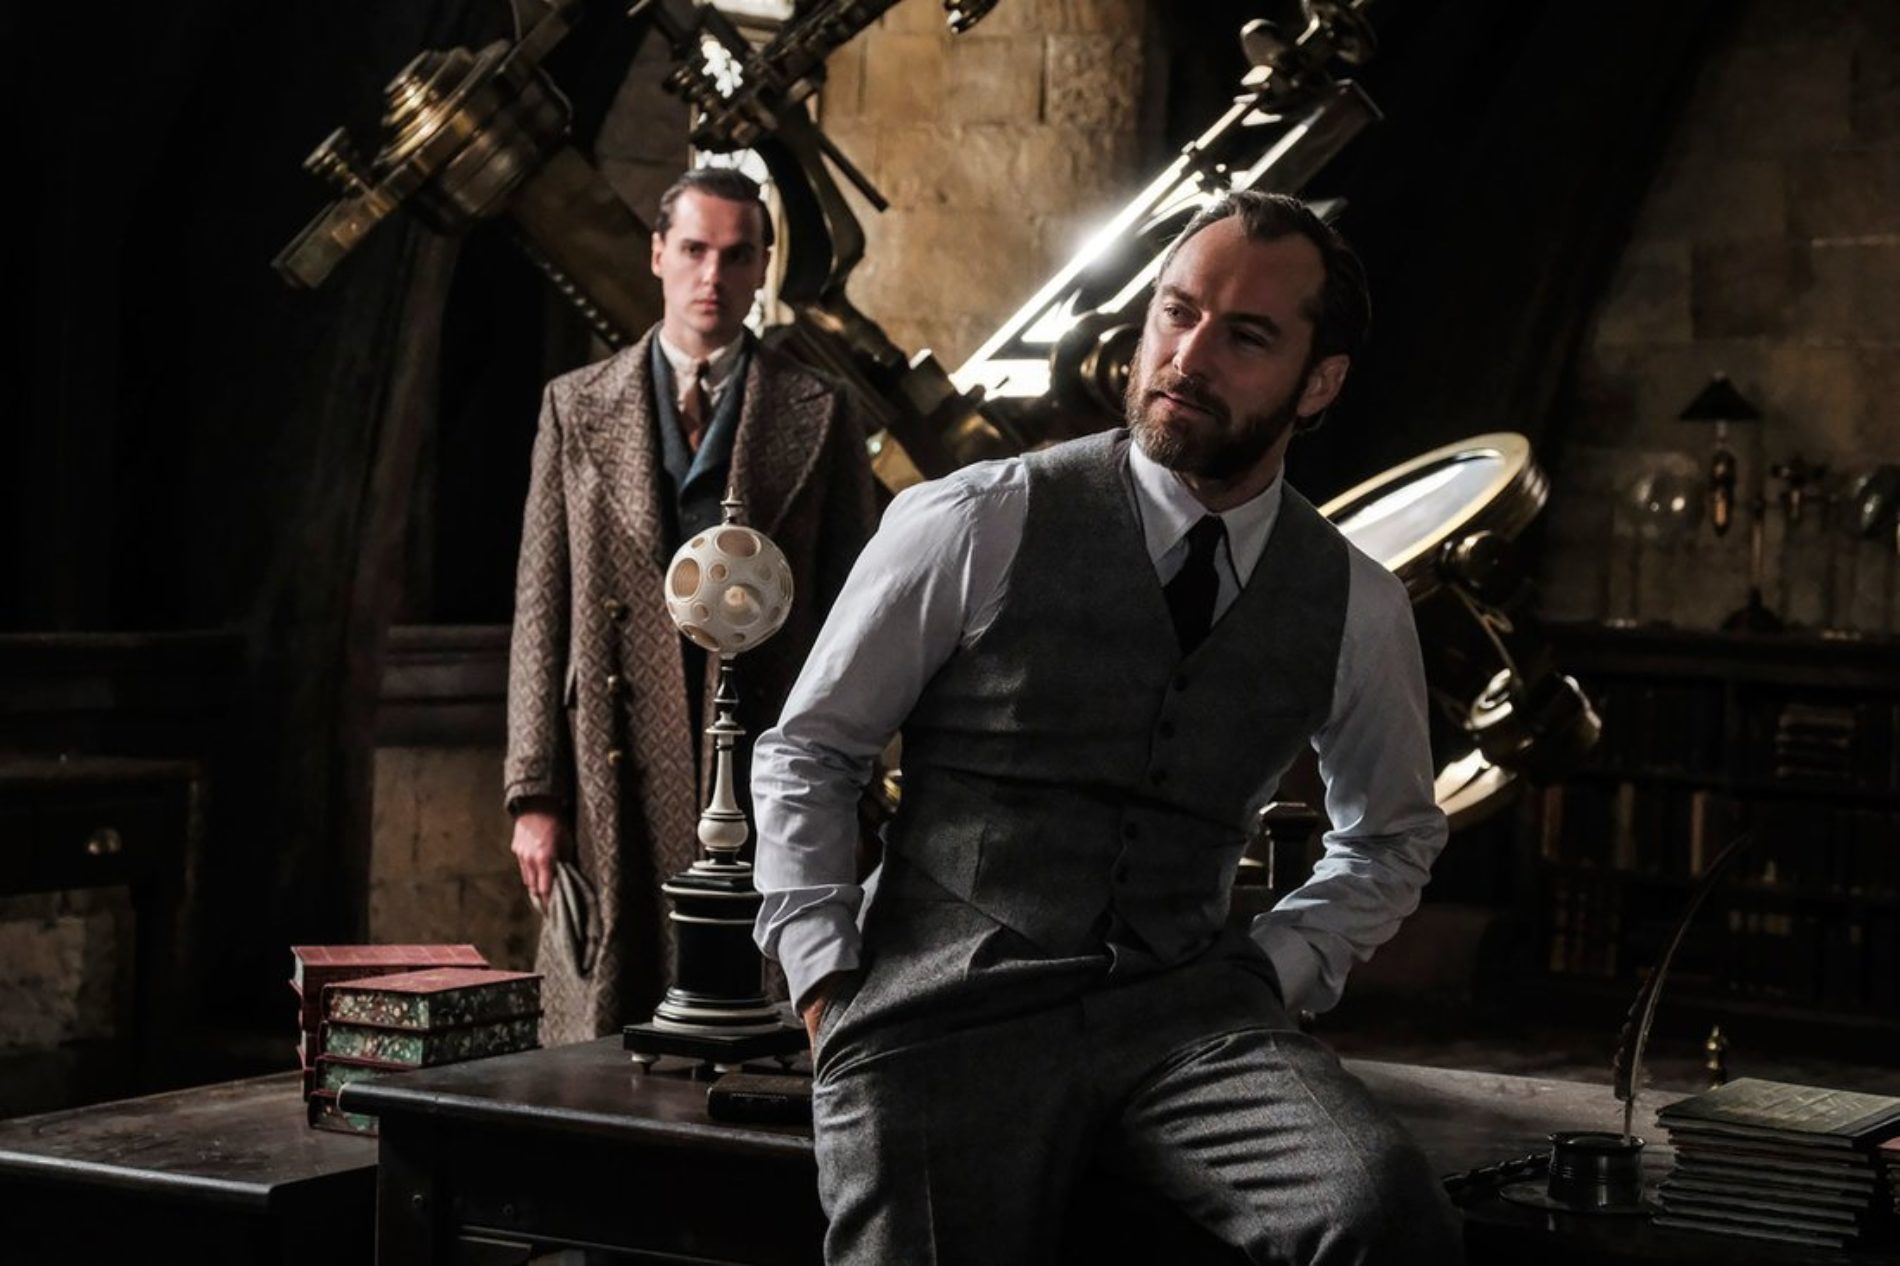 Harry Potter fans furious over director confirming that Dumbledore won’t be ‘explicitly gay’ in Fantastic Beasts 2